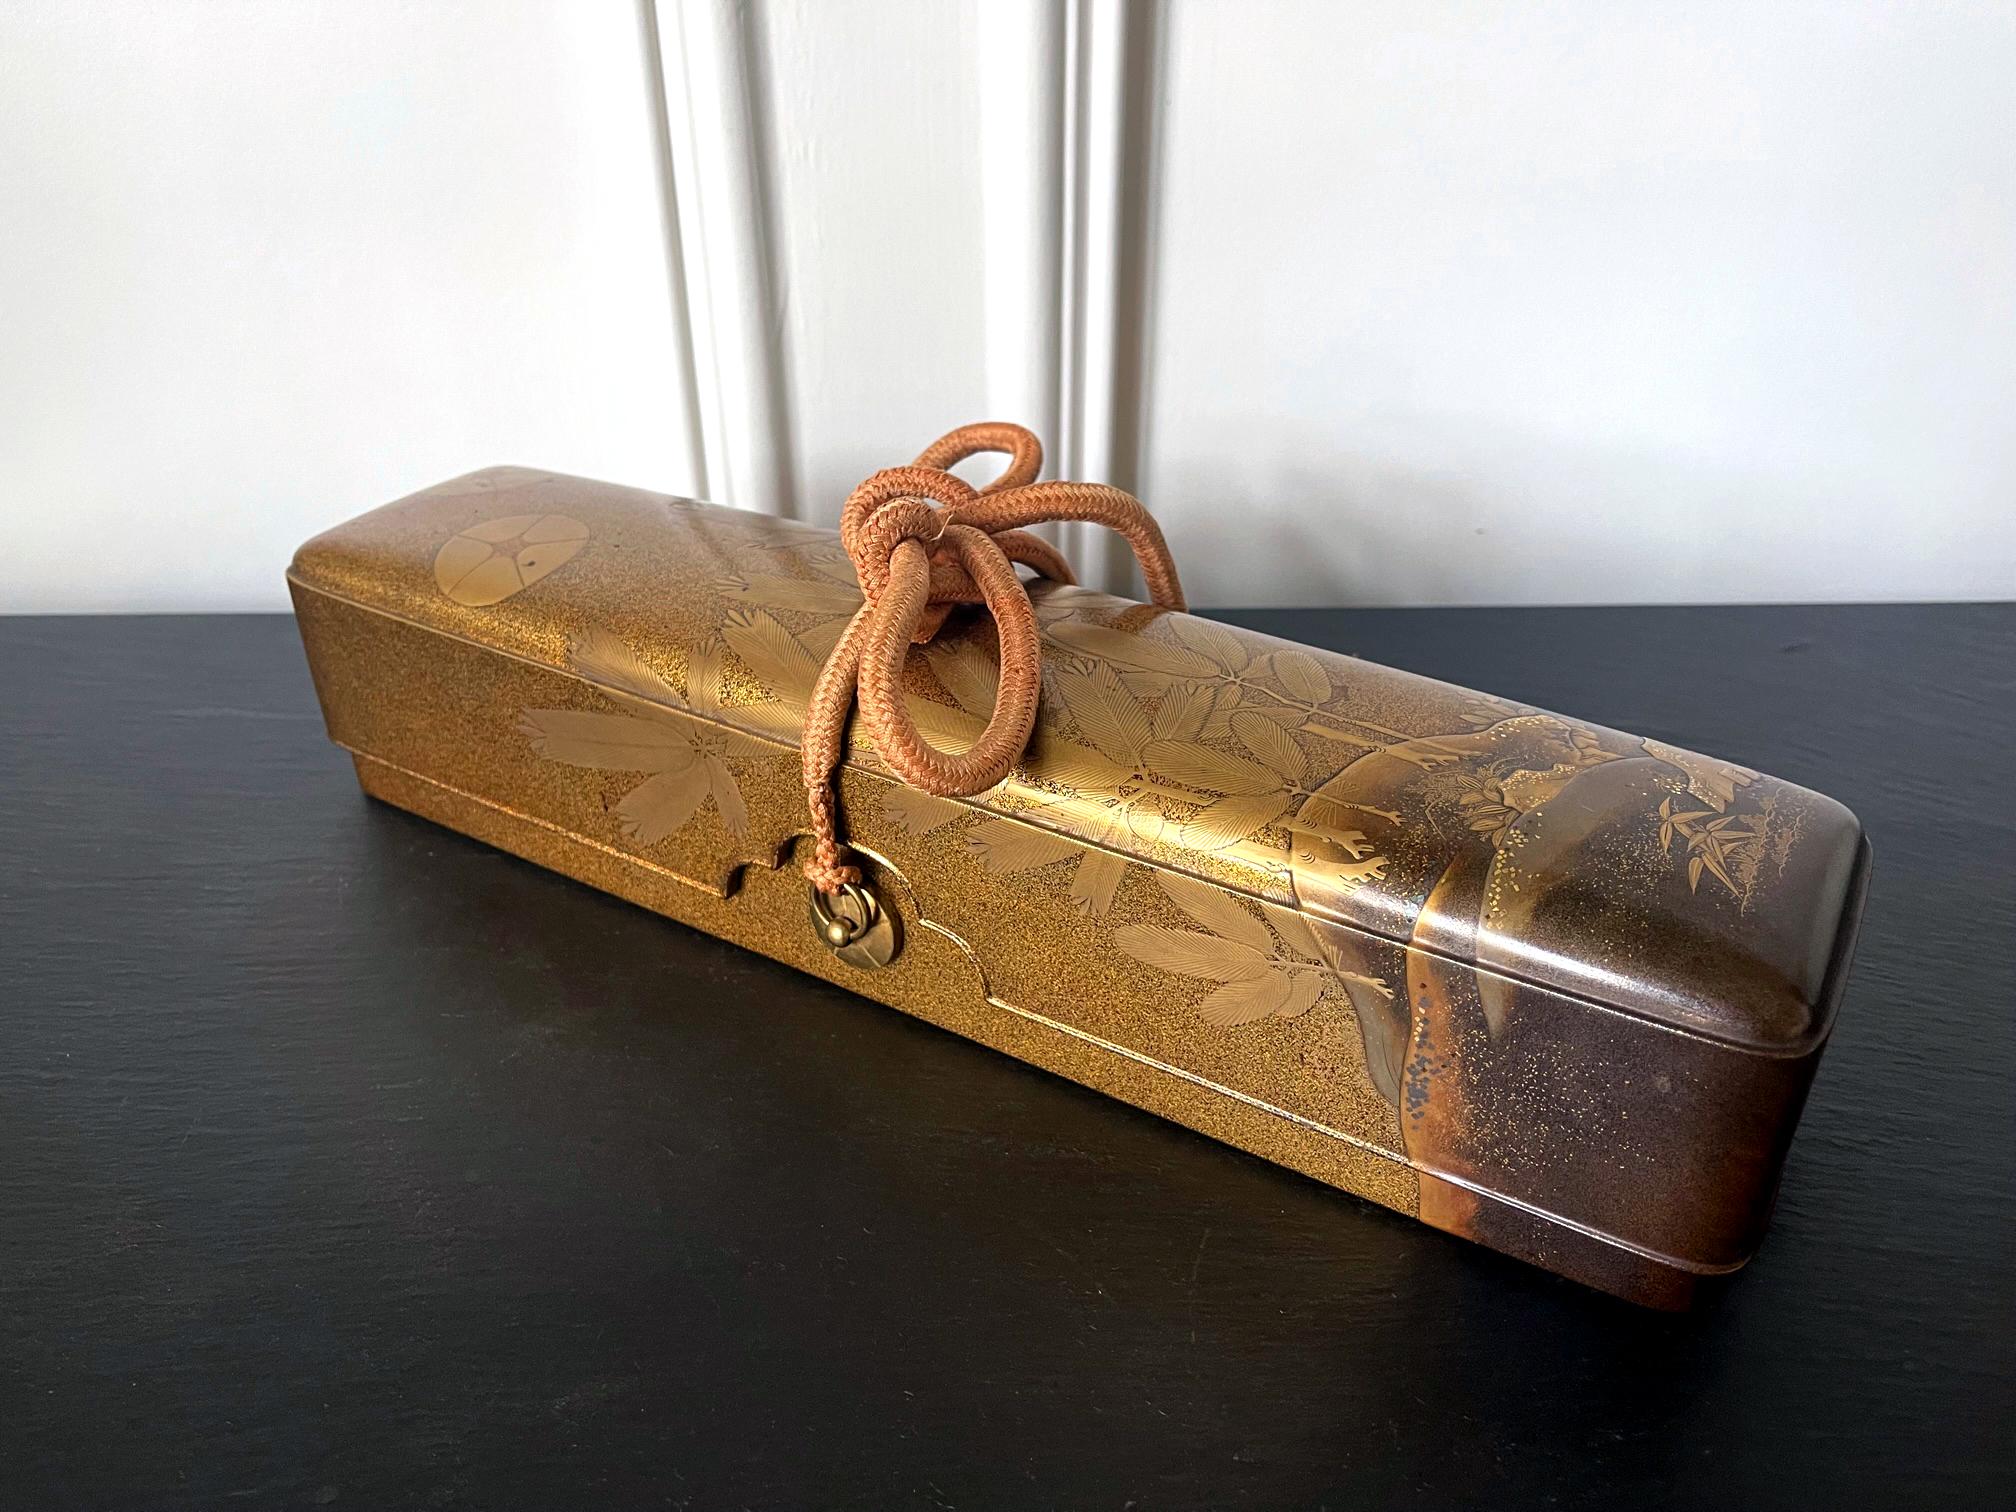 A Japanese lacquered wood Naga Fubako (a long box used to store document or large scroll painting), circa 19th century Meiji period. The rectangular box features an unusually deep lipped lid with slightly rounded corners, a conforming lower box with